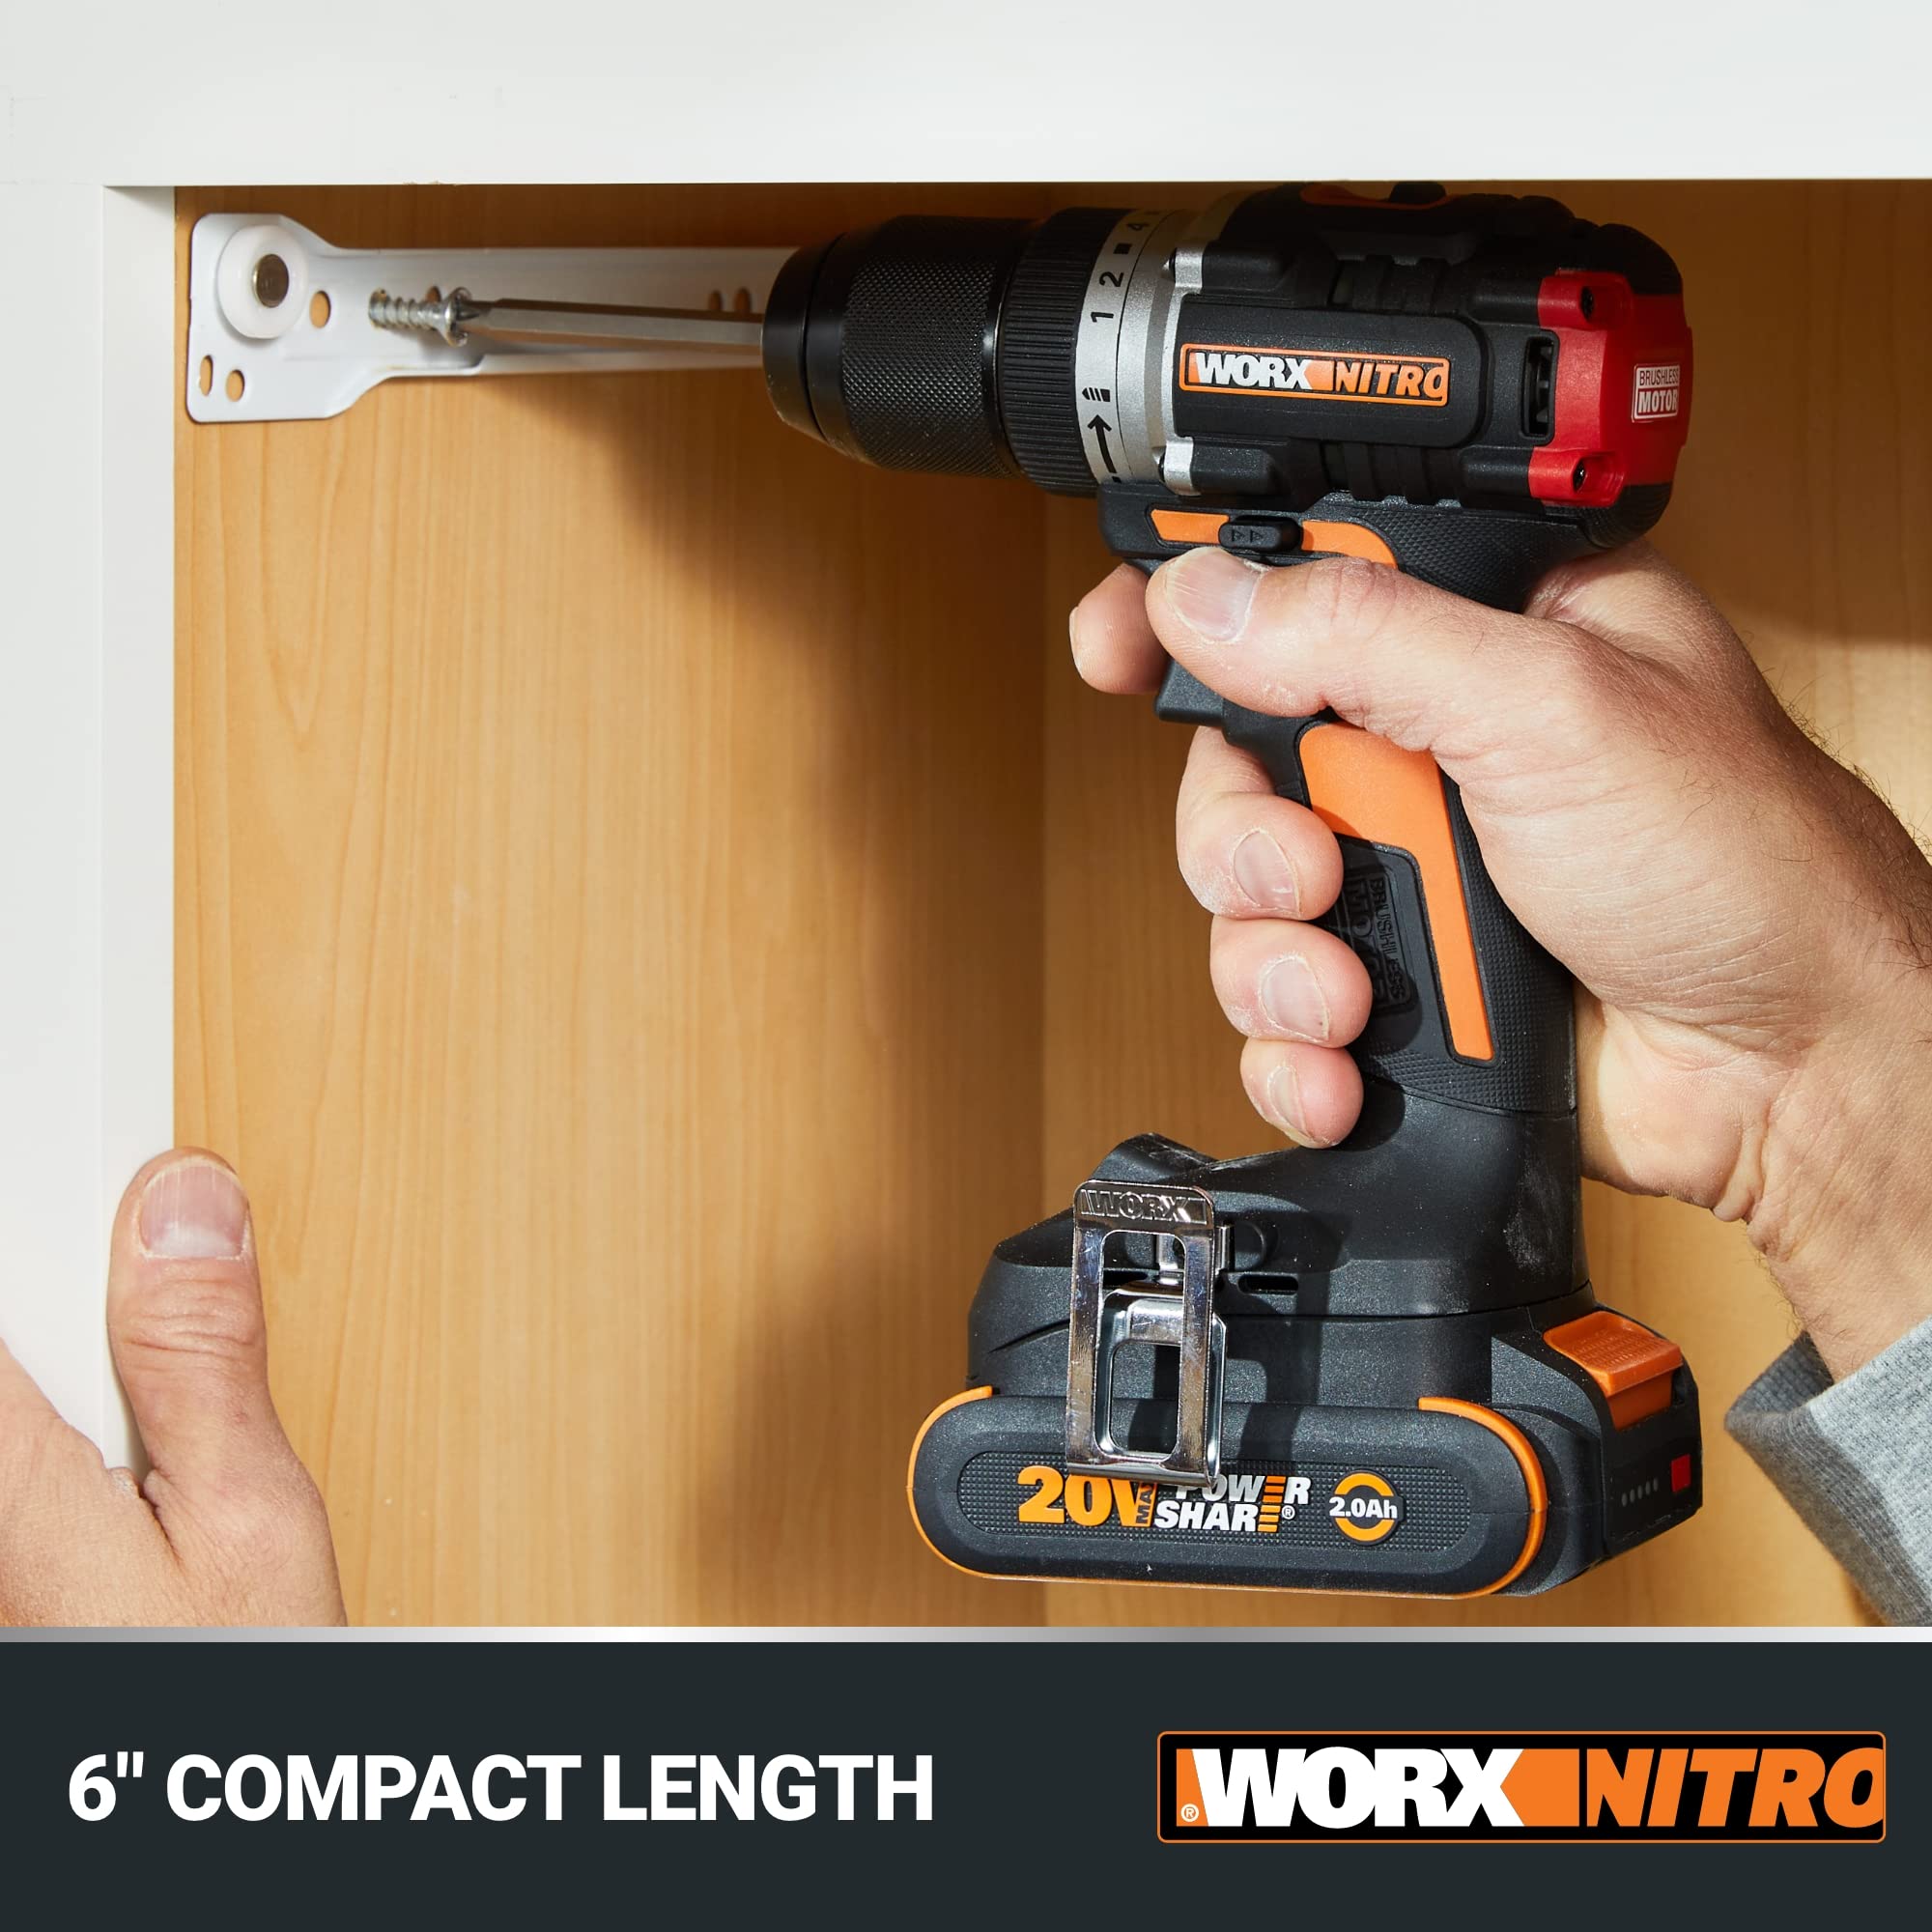 Worx Nitro 20V Compact Brushless 1/2” Drill/Driver - Tool Only WX130L.9